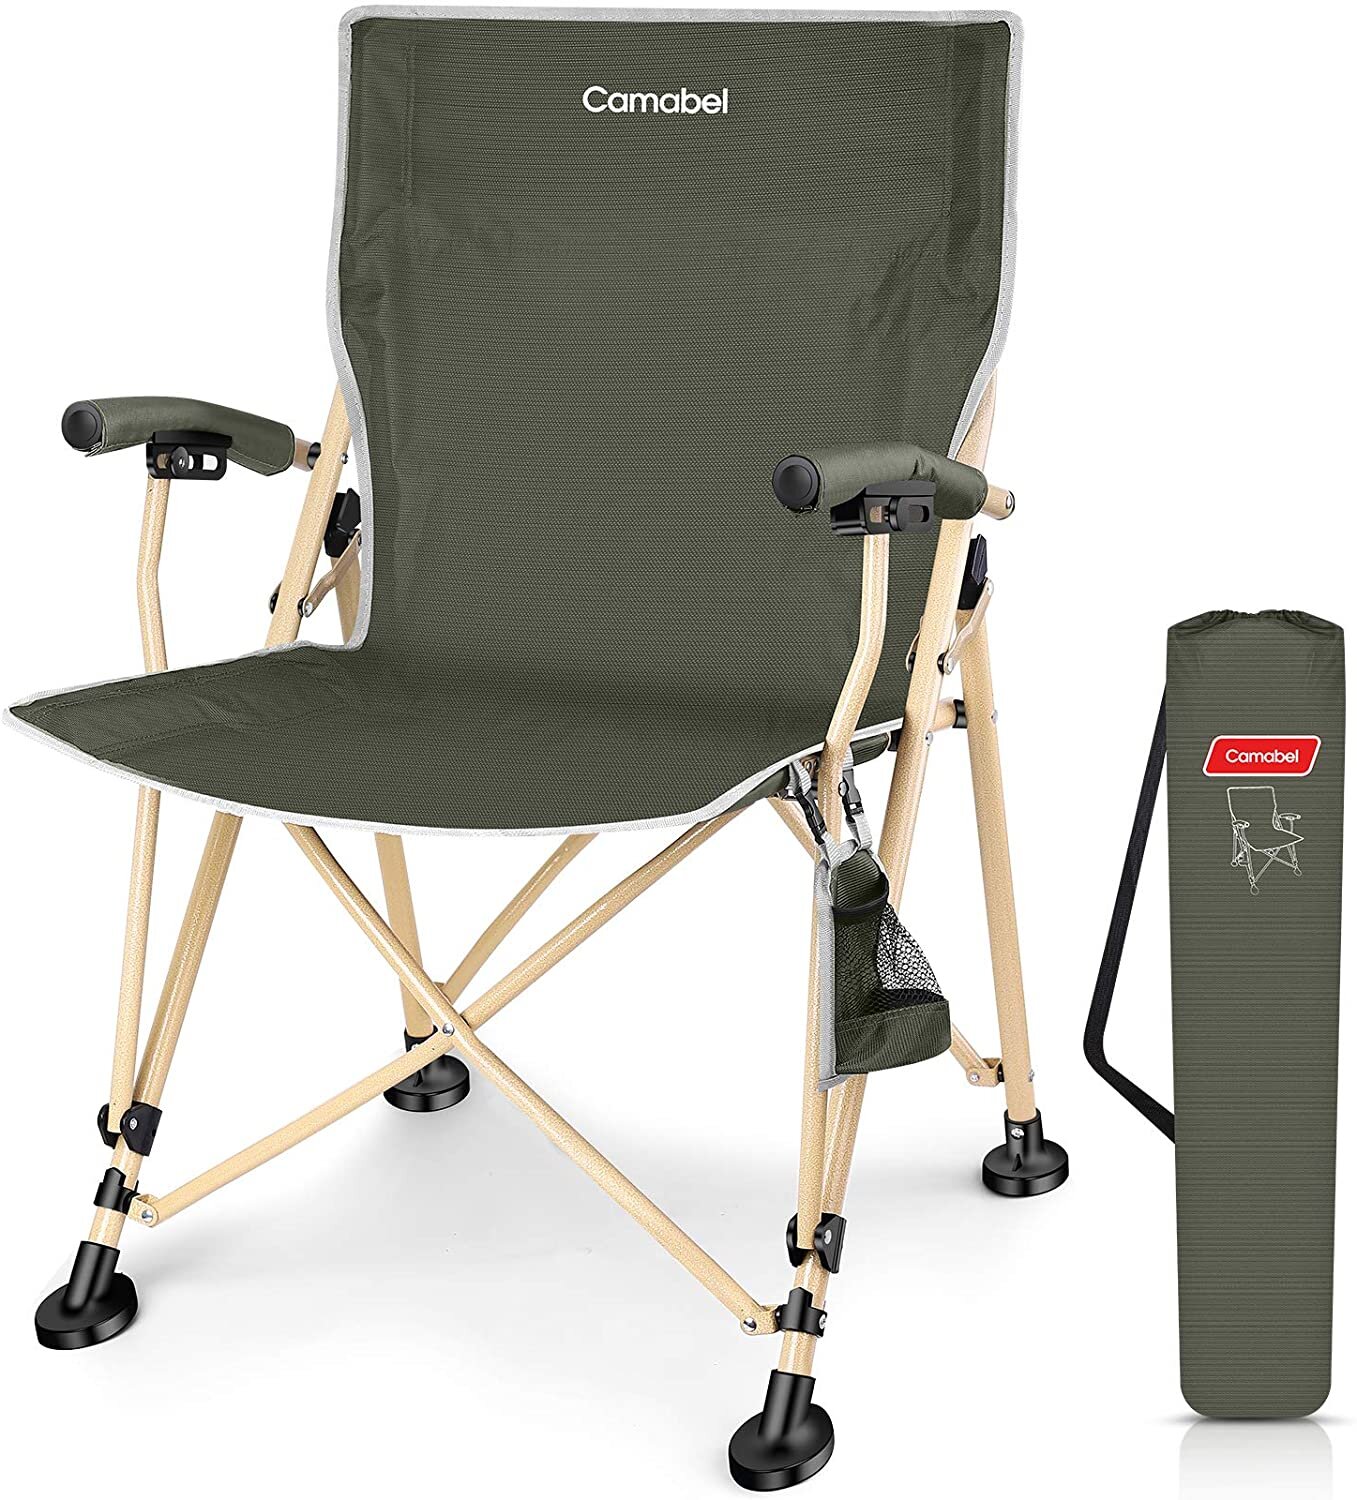 Camping Chair Folding Set Of 4 Arm Regular Portable Picnic Outdoor Hiking New